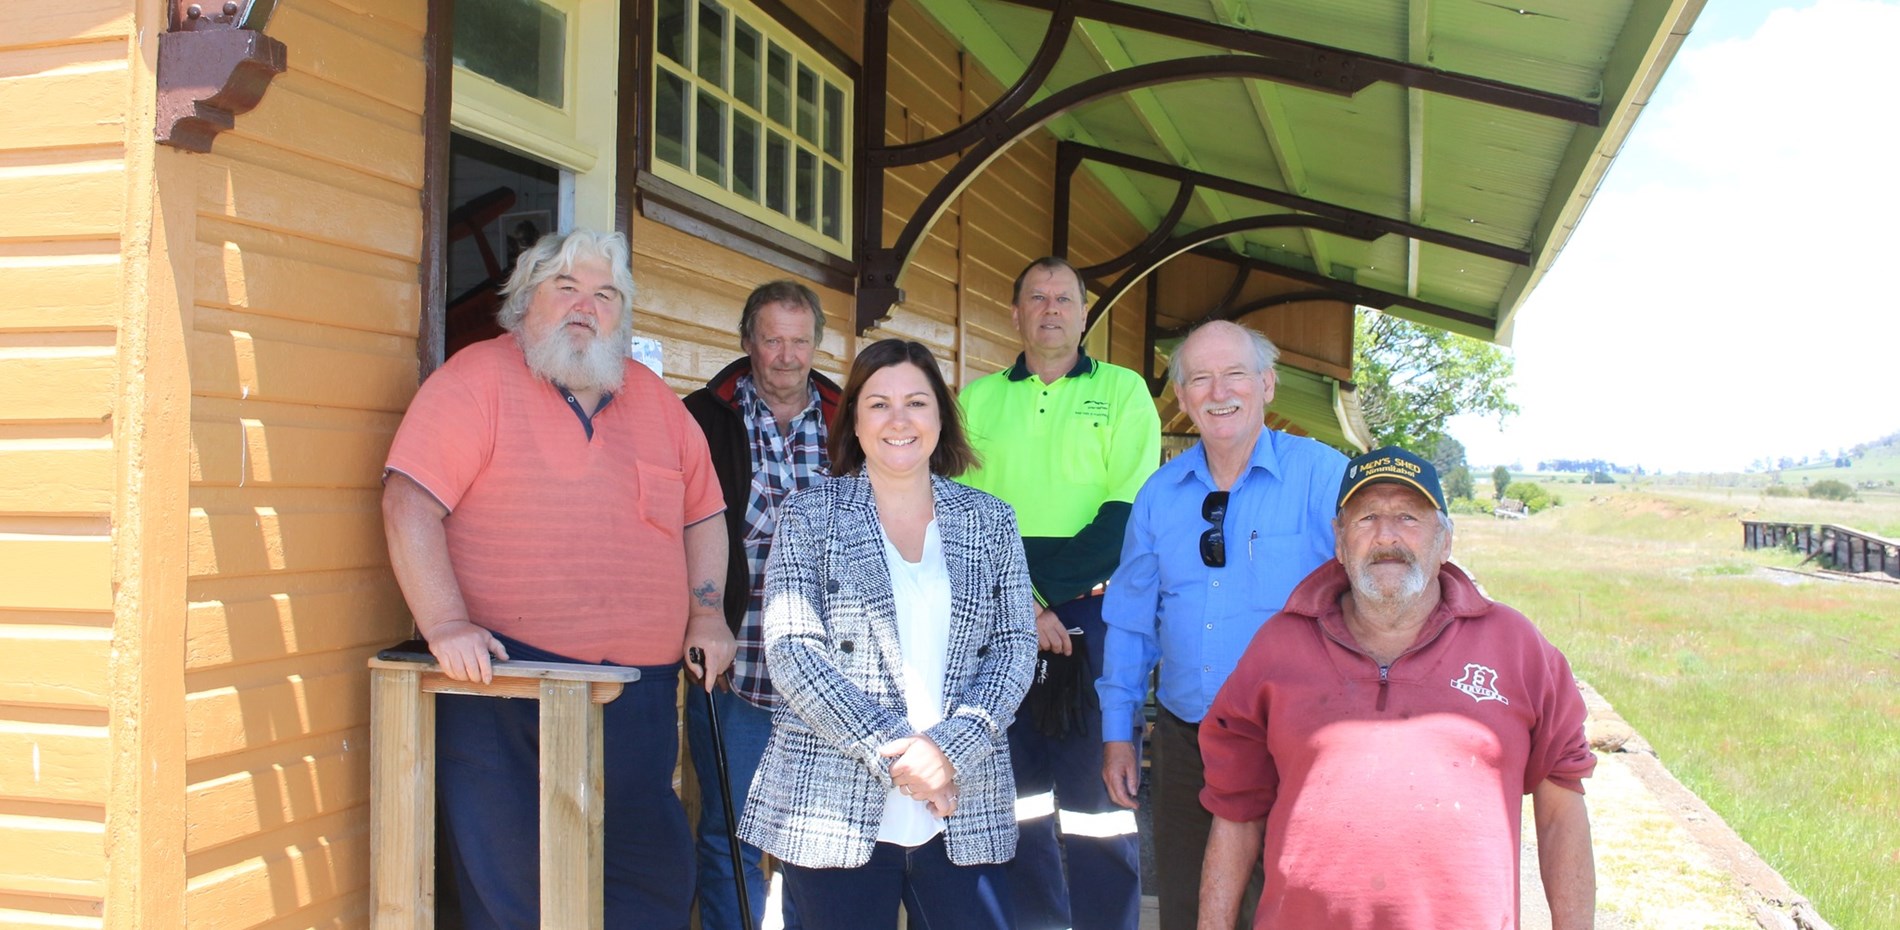 MEN’S WELLBEING SUPPORTED WITH GRANTS FOR EDEN-MONARO MEN’S SHEDS Main Image